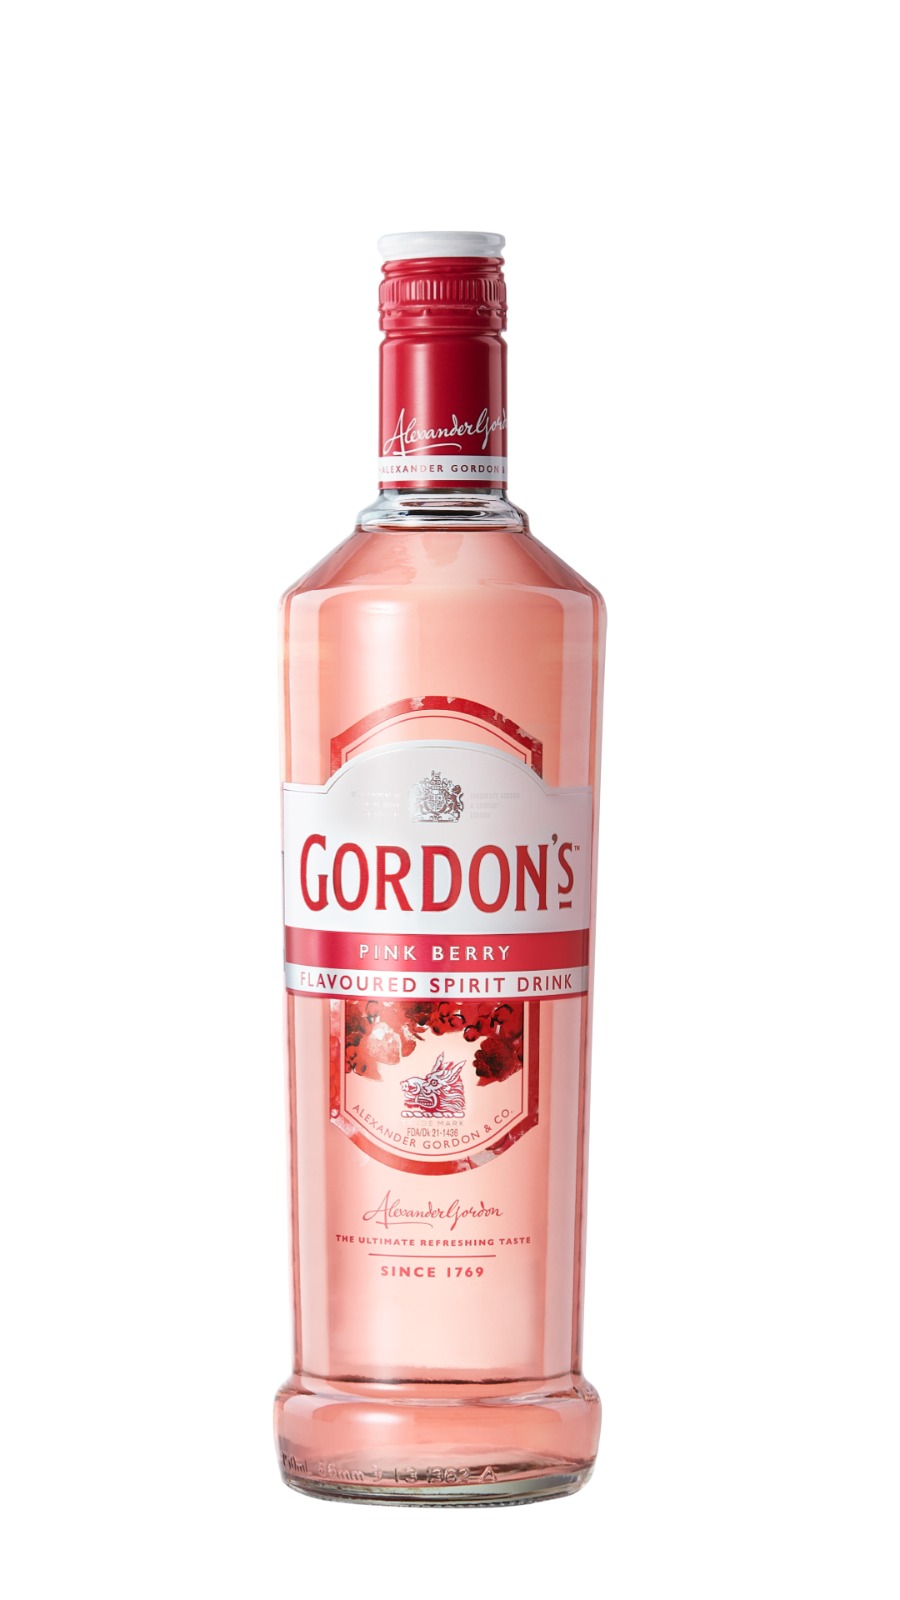 Guinness Ghana launches Gordon’s Pink Berry flavoured spirit drink urging Ghanaians to #PinkDifferently